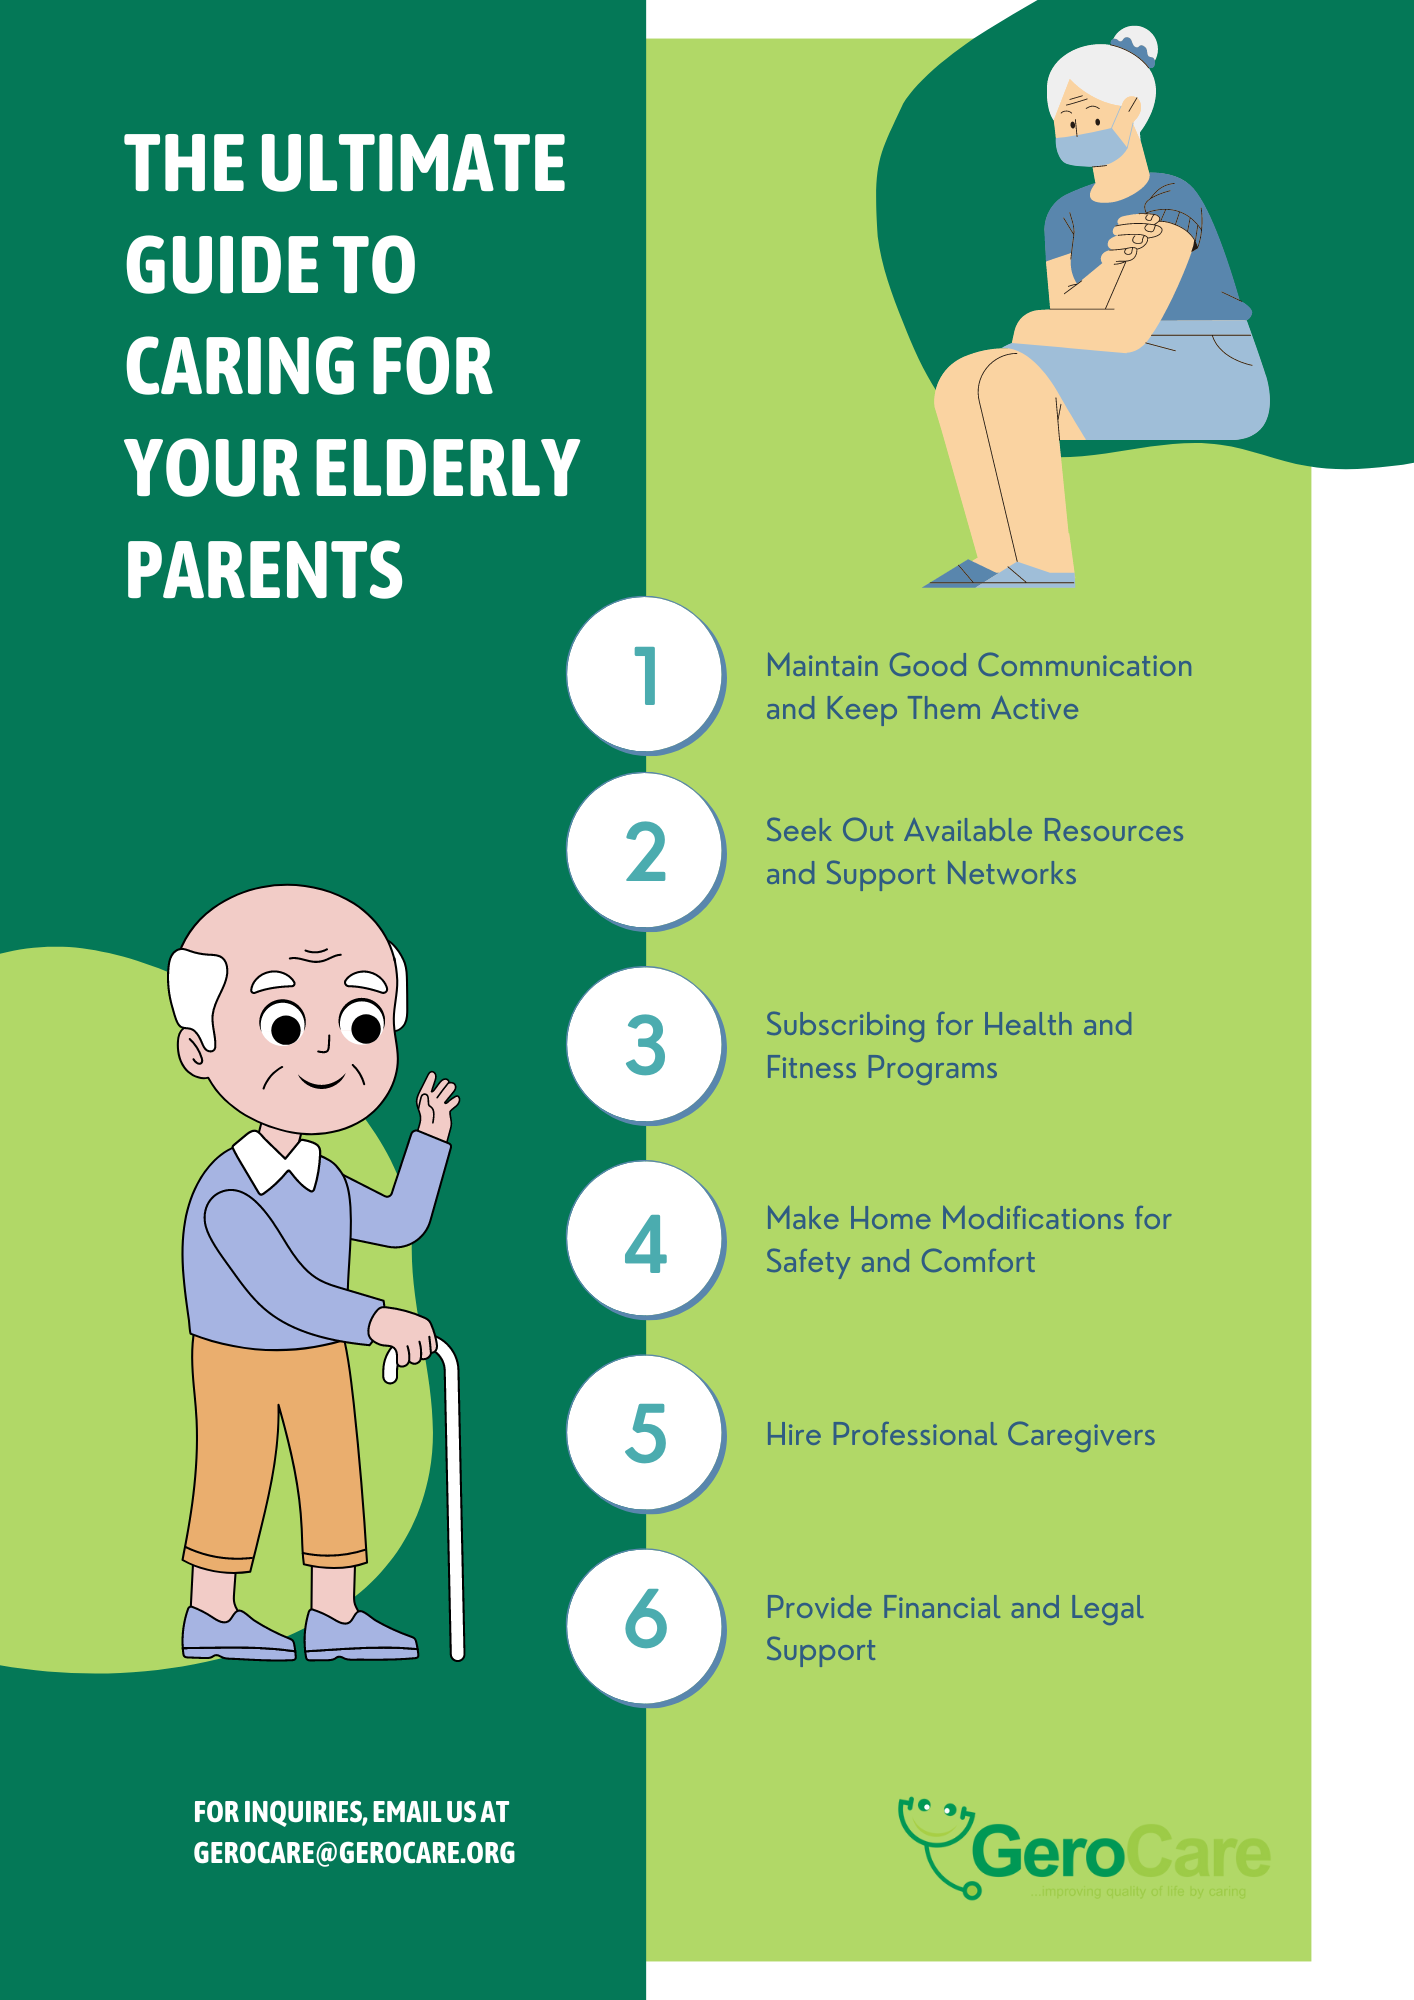 The Ultimate Guide to Caring for Your Elderly Parents in Nigeria